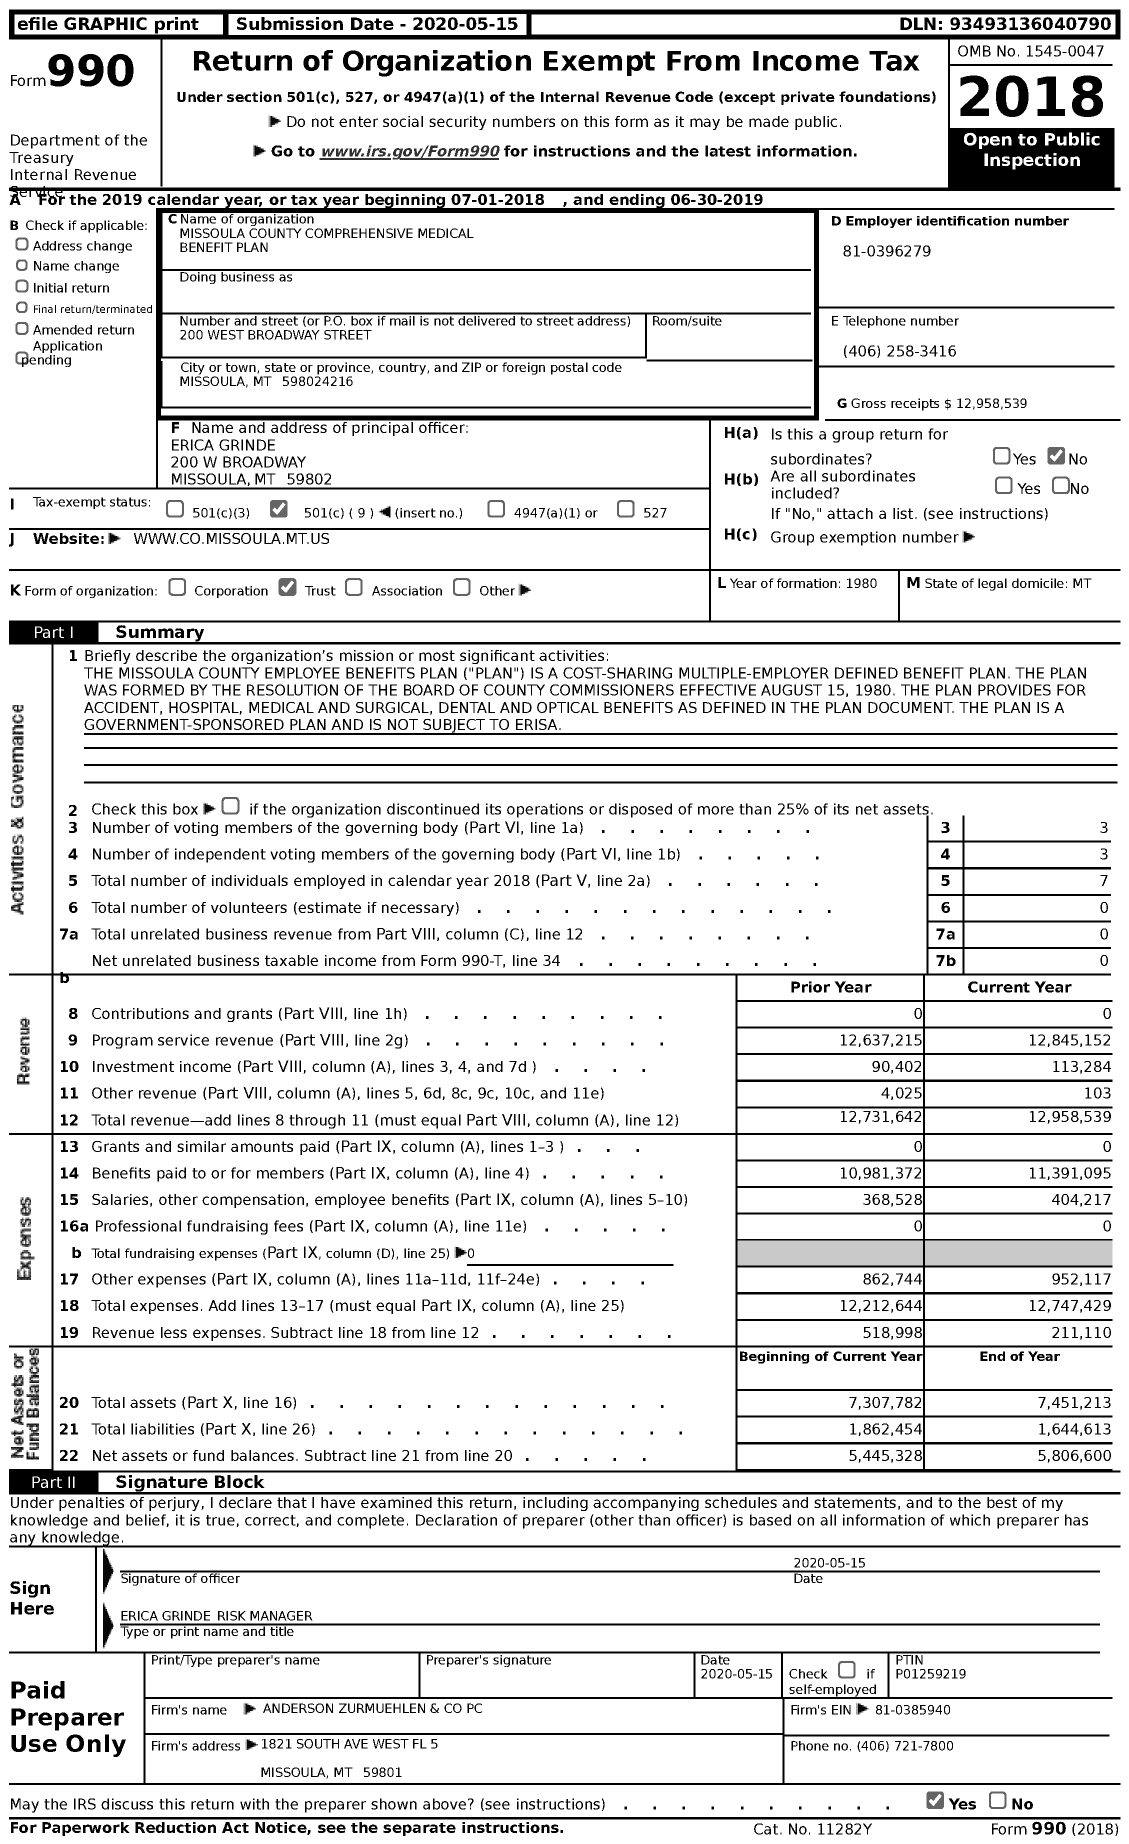 Image of first page of 2018 Form 990 for Missoula County Comprehensive Medical Benefit Plan